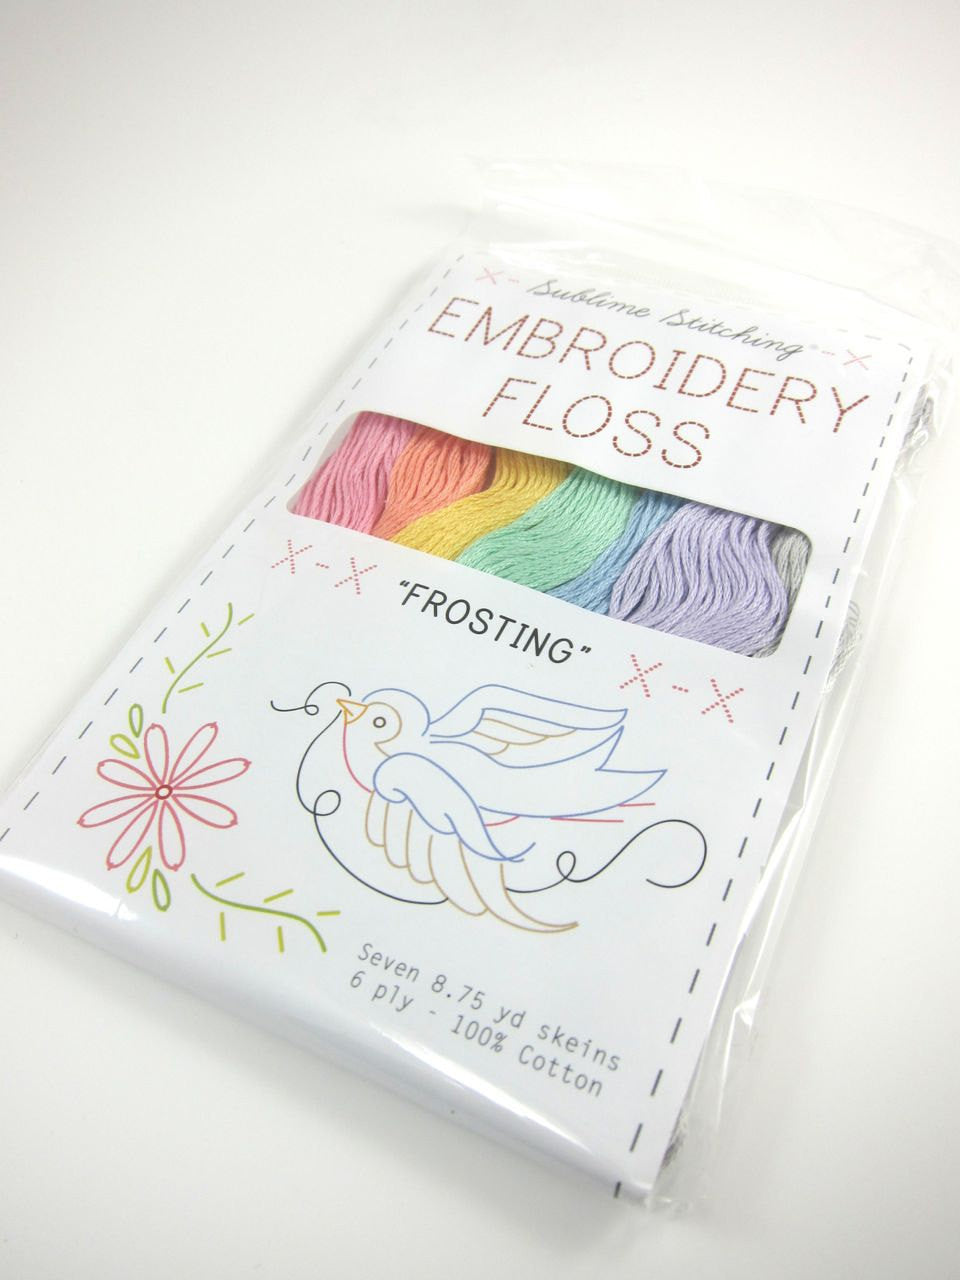 Sublime Stitching Craftopia Hand Embroidery Pattern – Snuggly Monkey